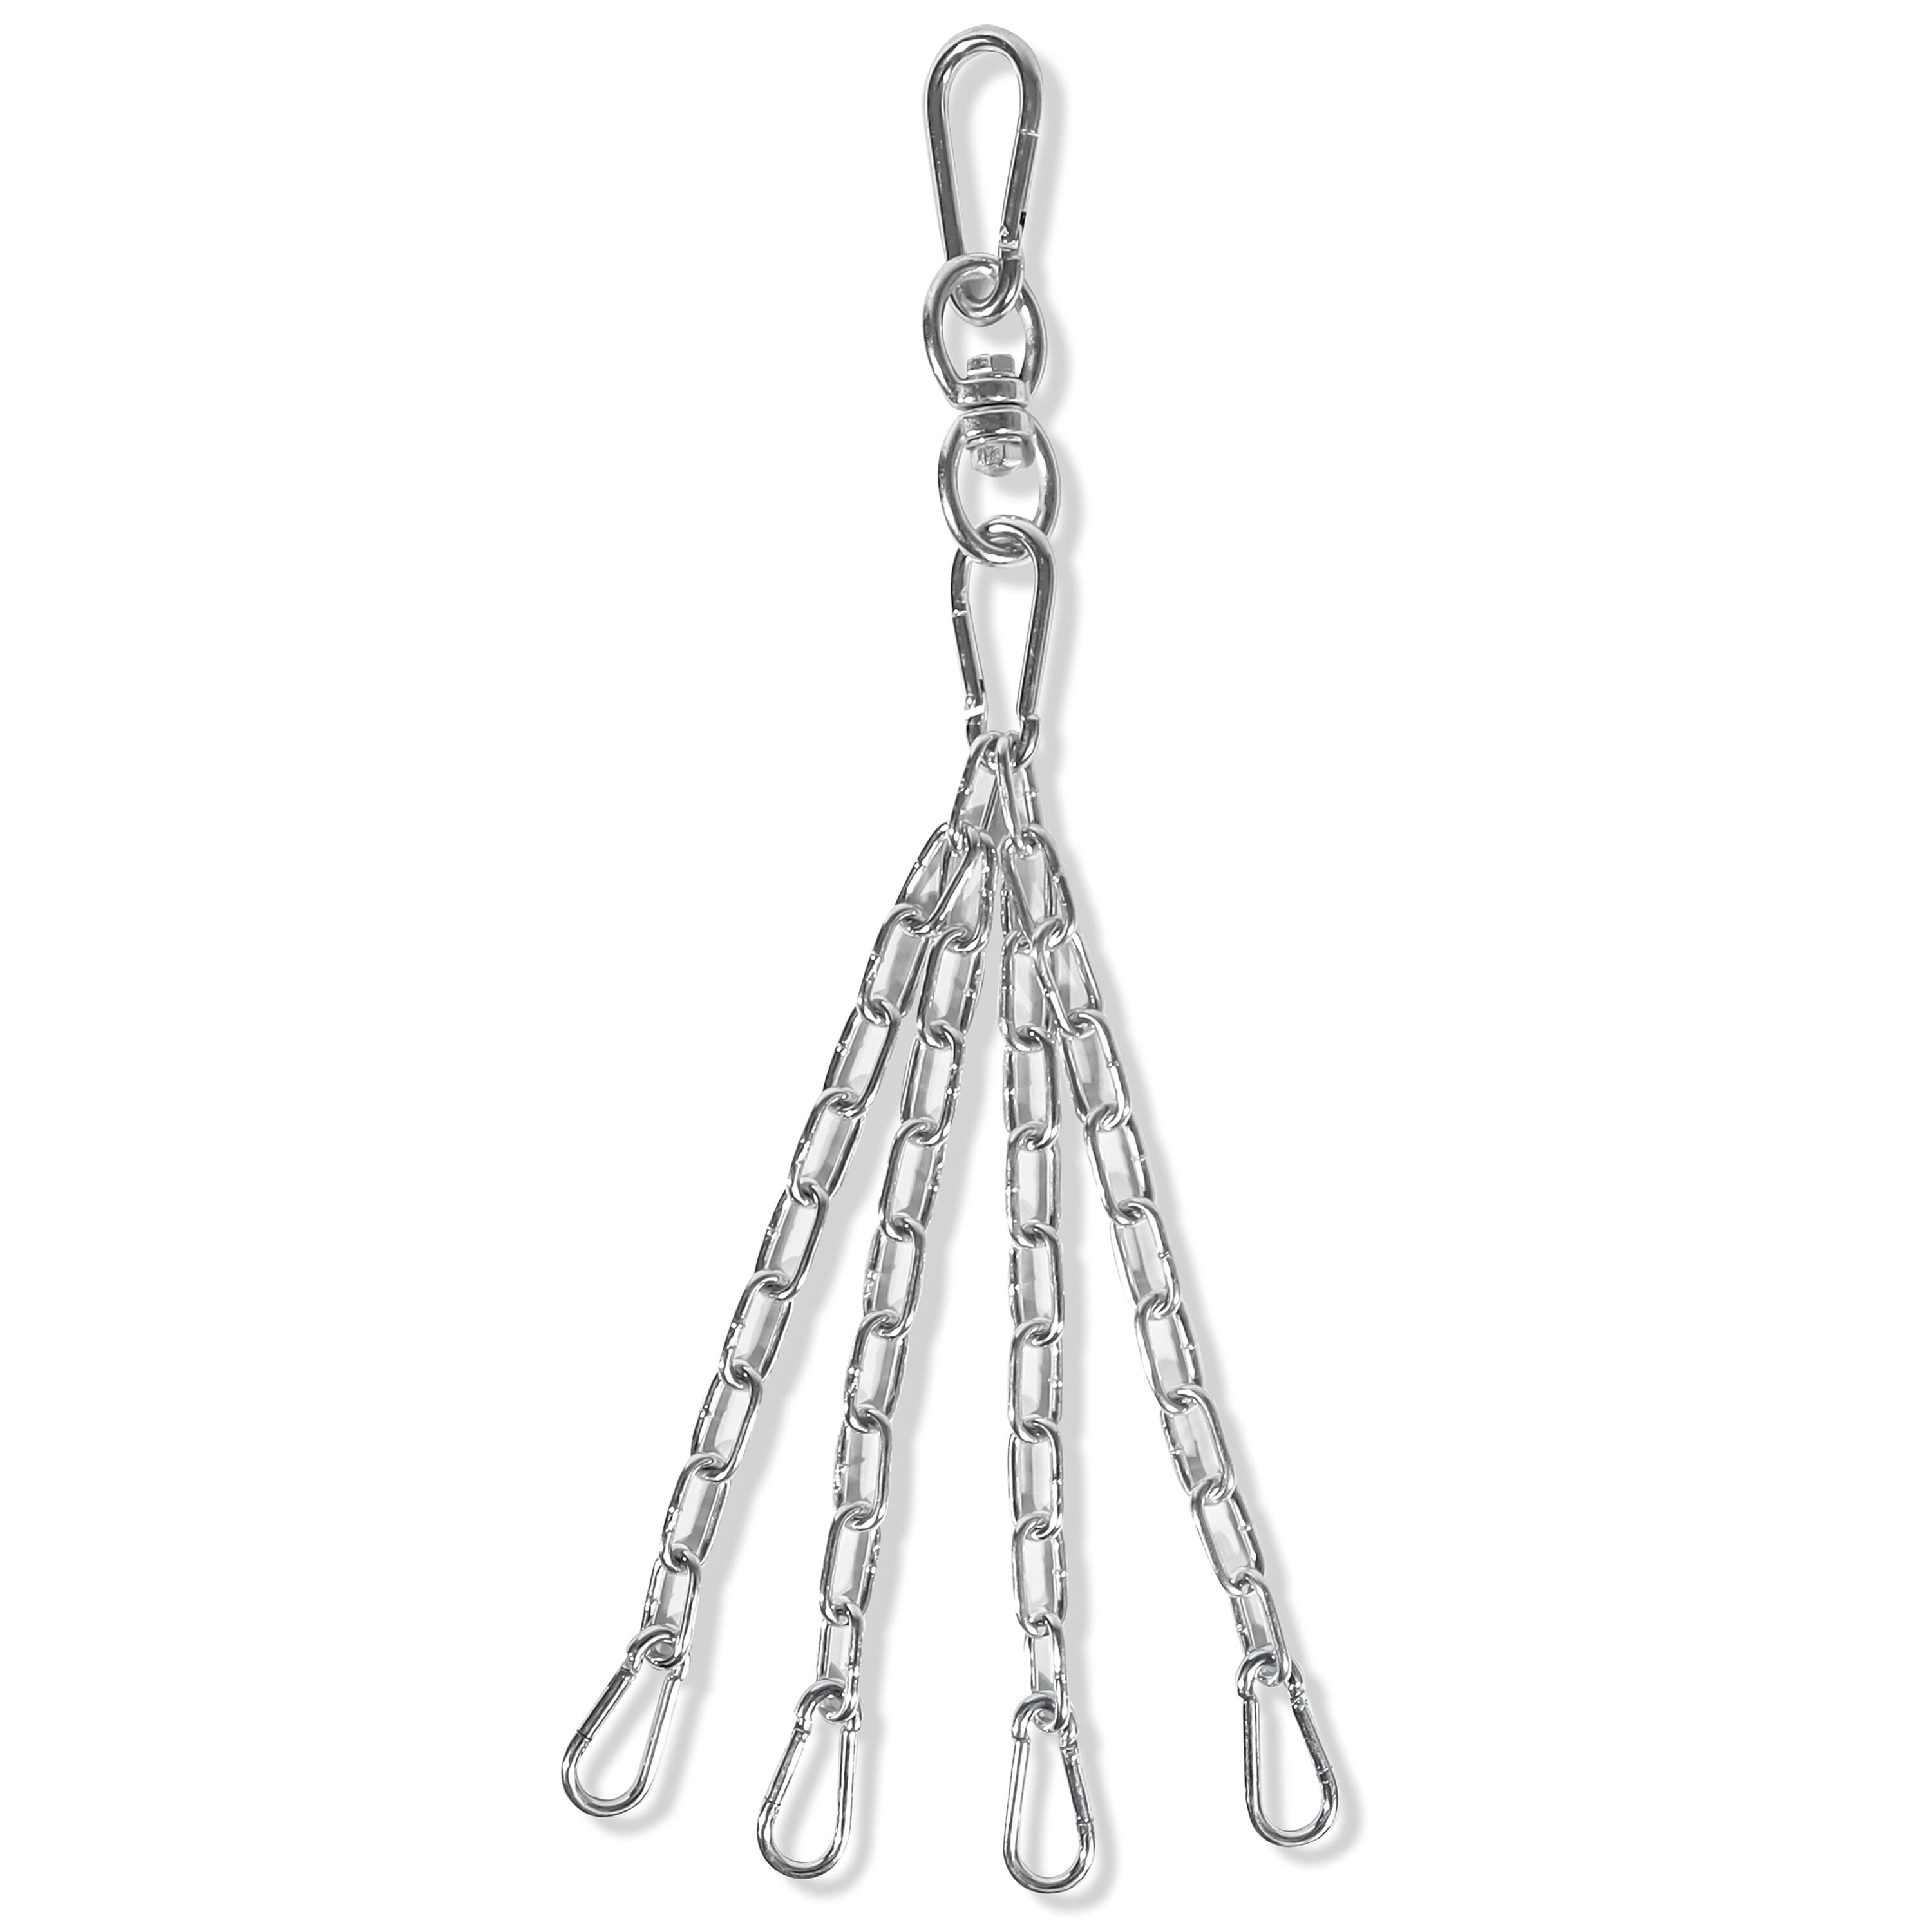 Heavy Duty Punch Bag Hanging Chain 304 Stainless Steel 200 cm long